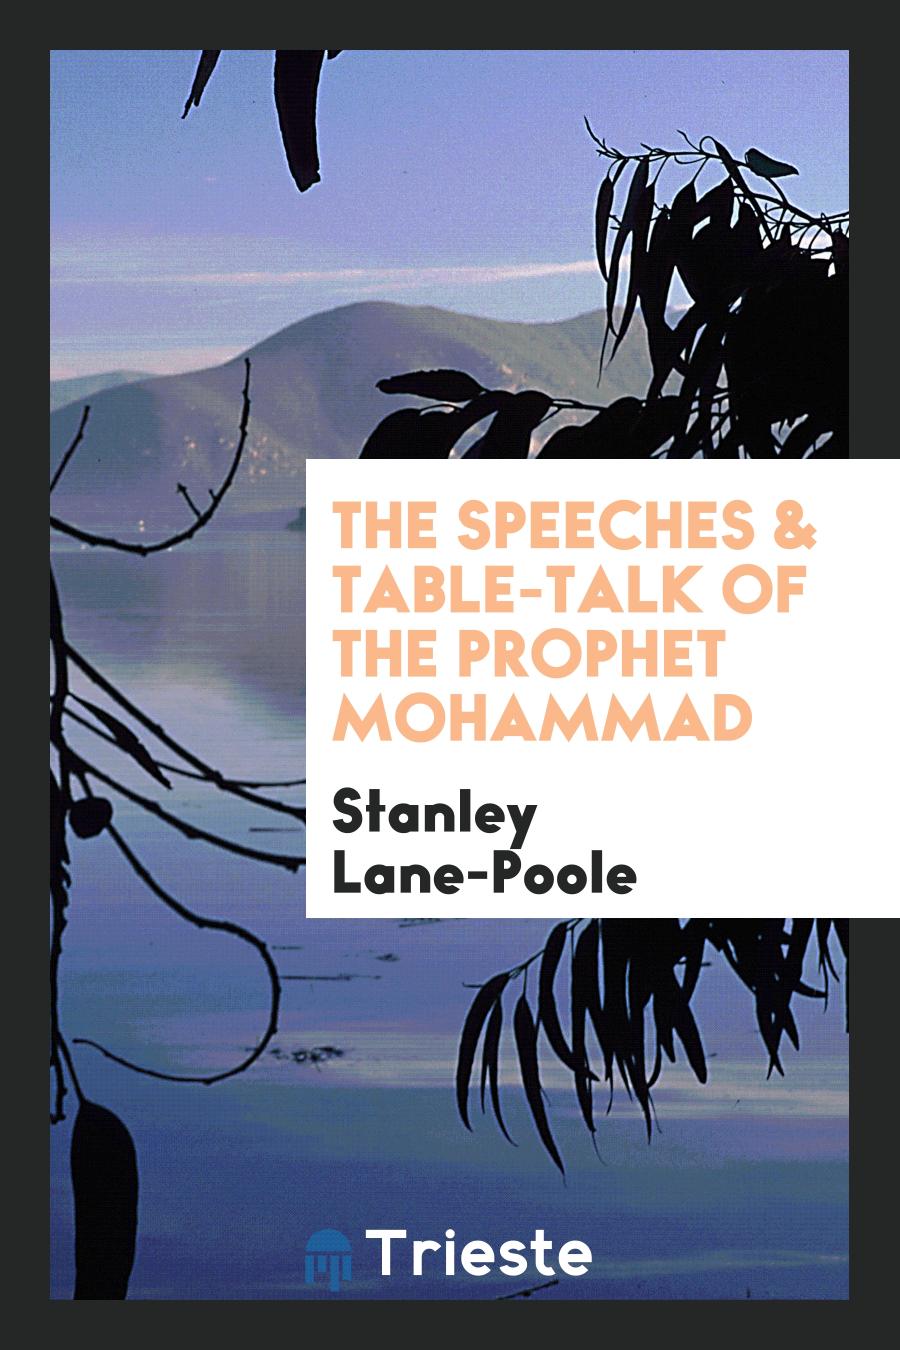 The speeches & table-talk of the prophet Mohammad